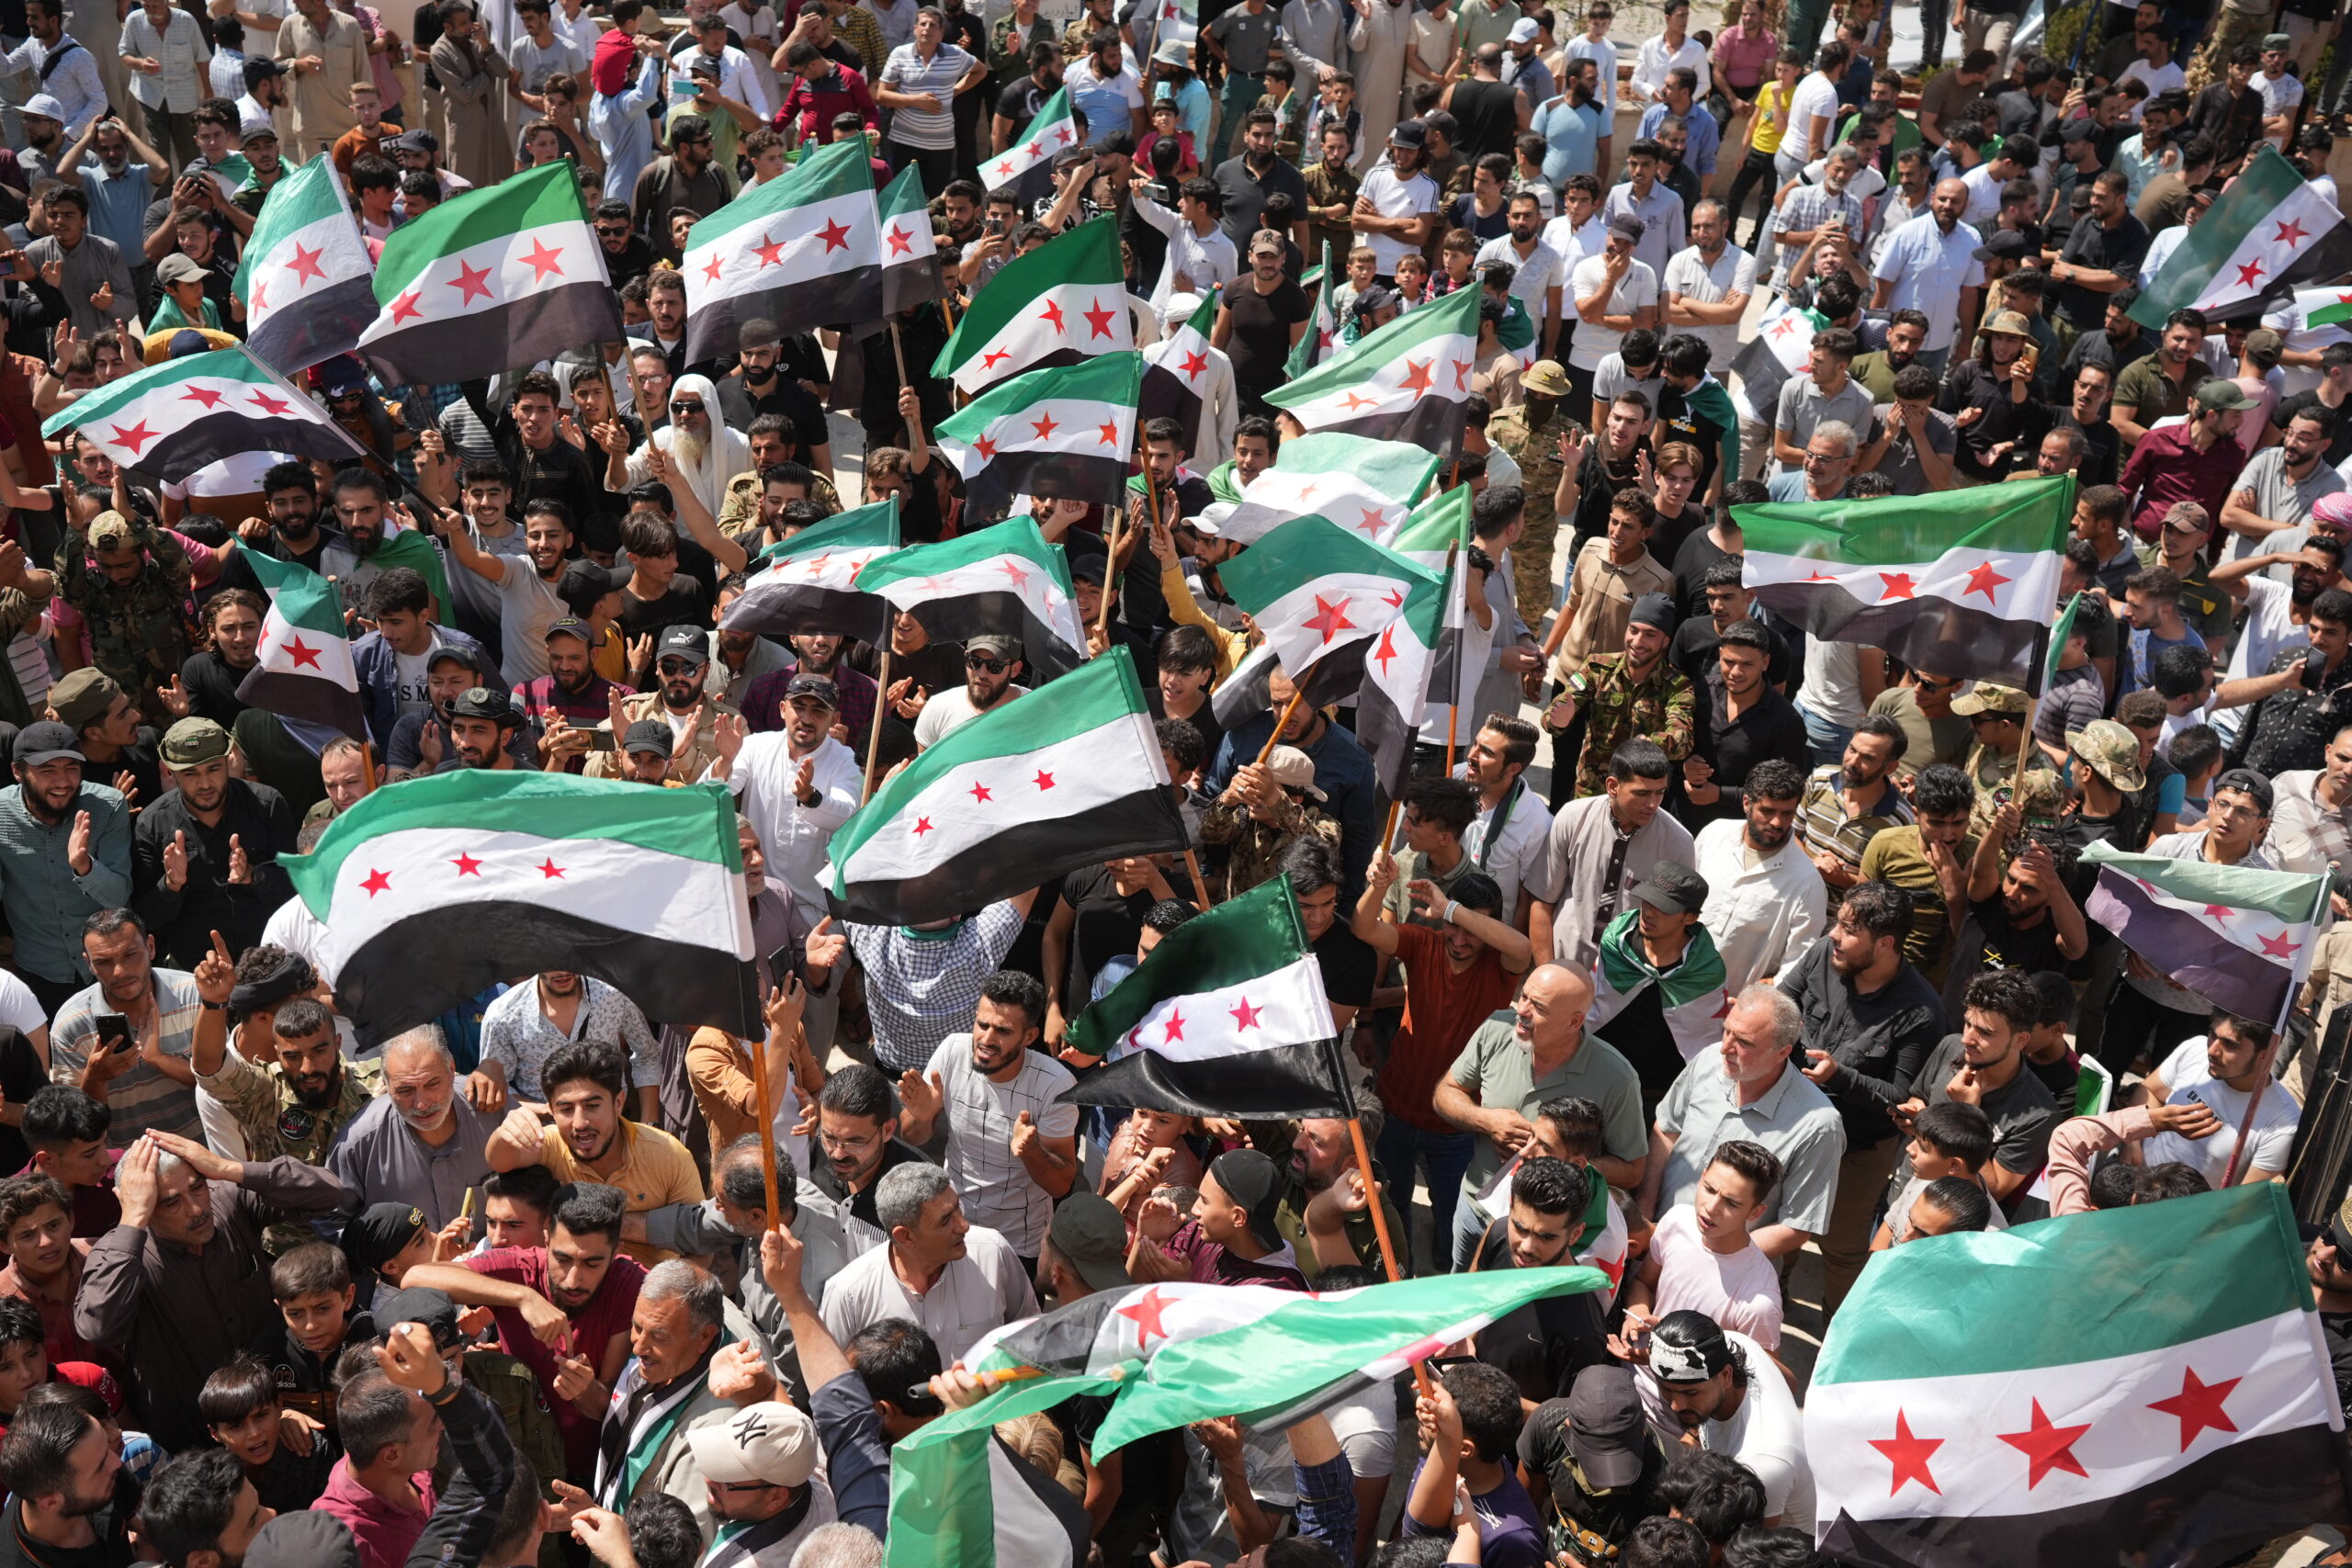 SYRIA-CONFLICT-PROTEST